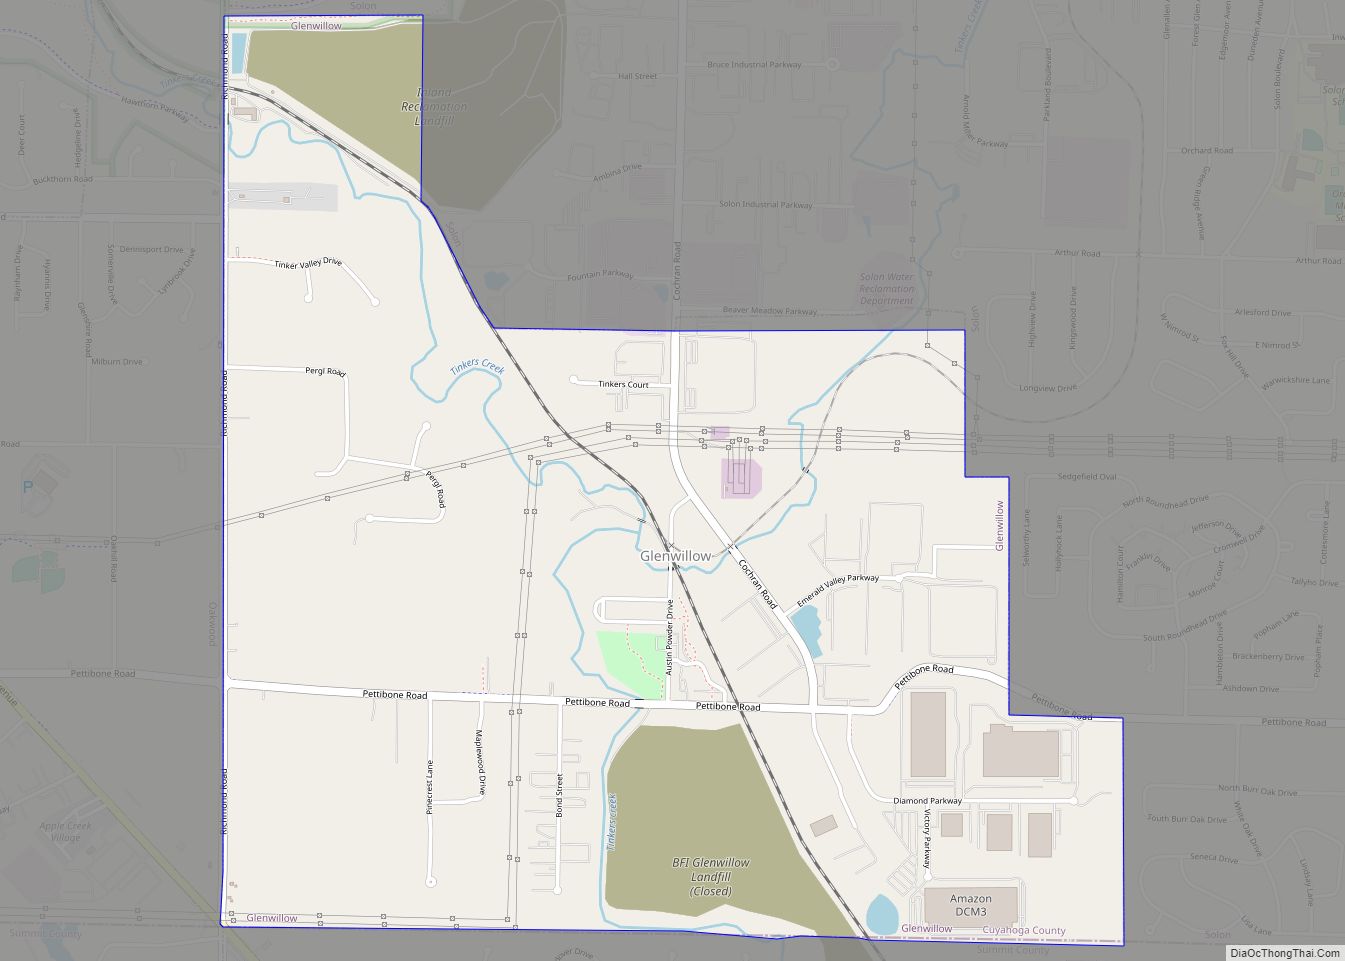 Map of Glenwillow village